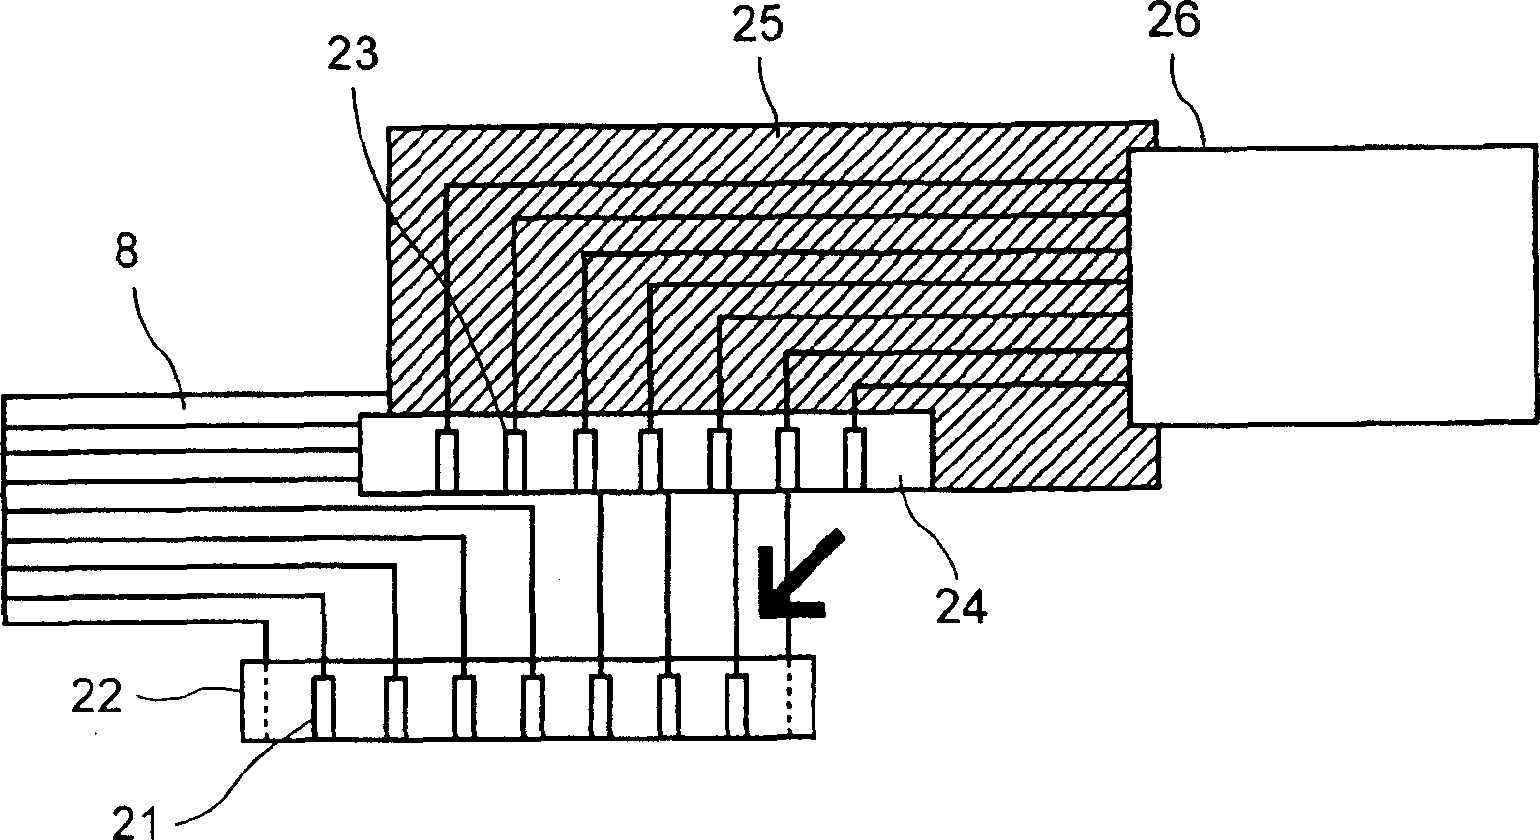 System for repolarizing transducers in an ultrasonic probe